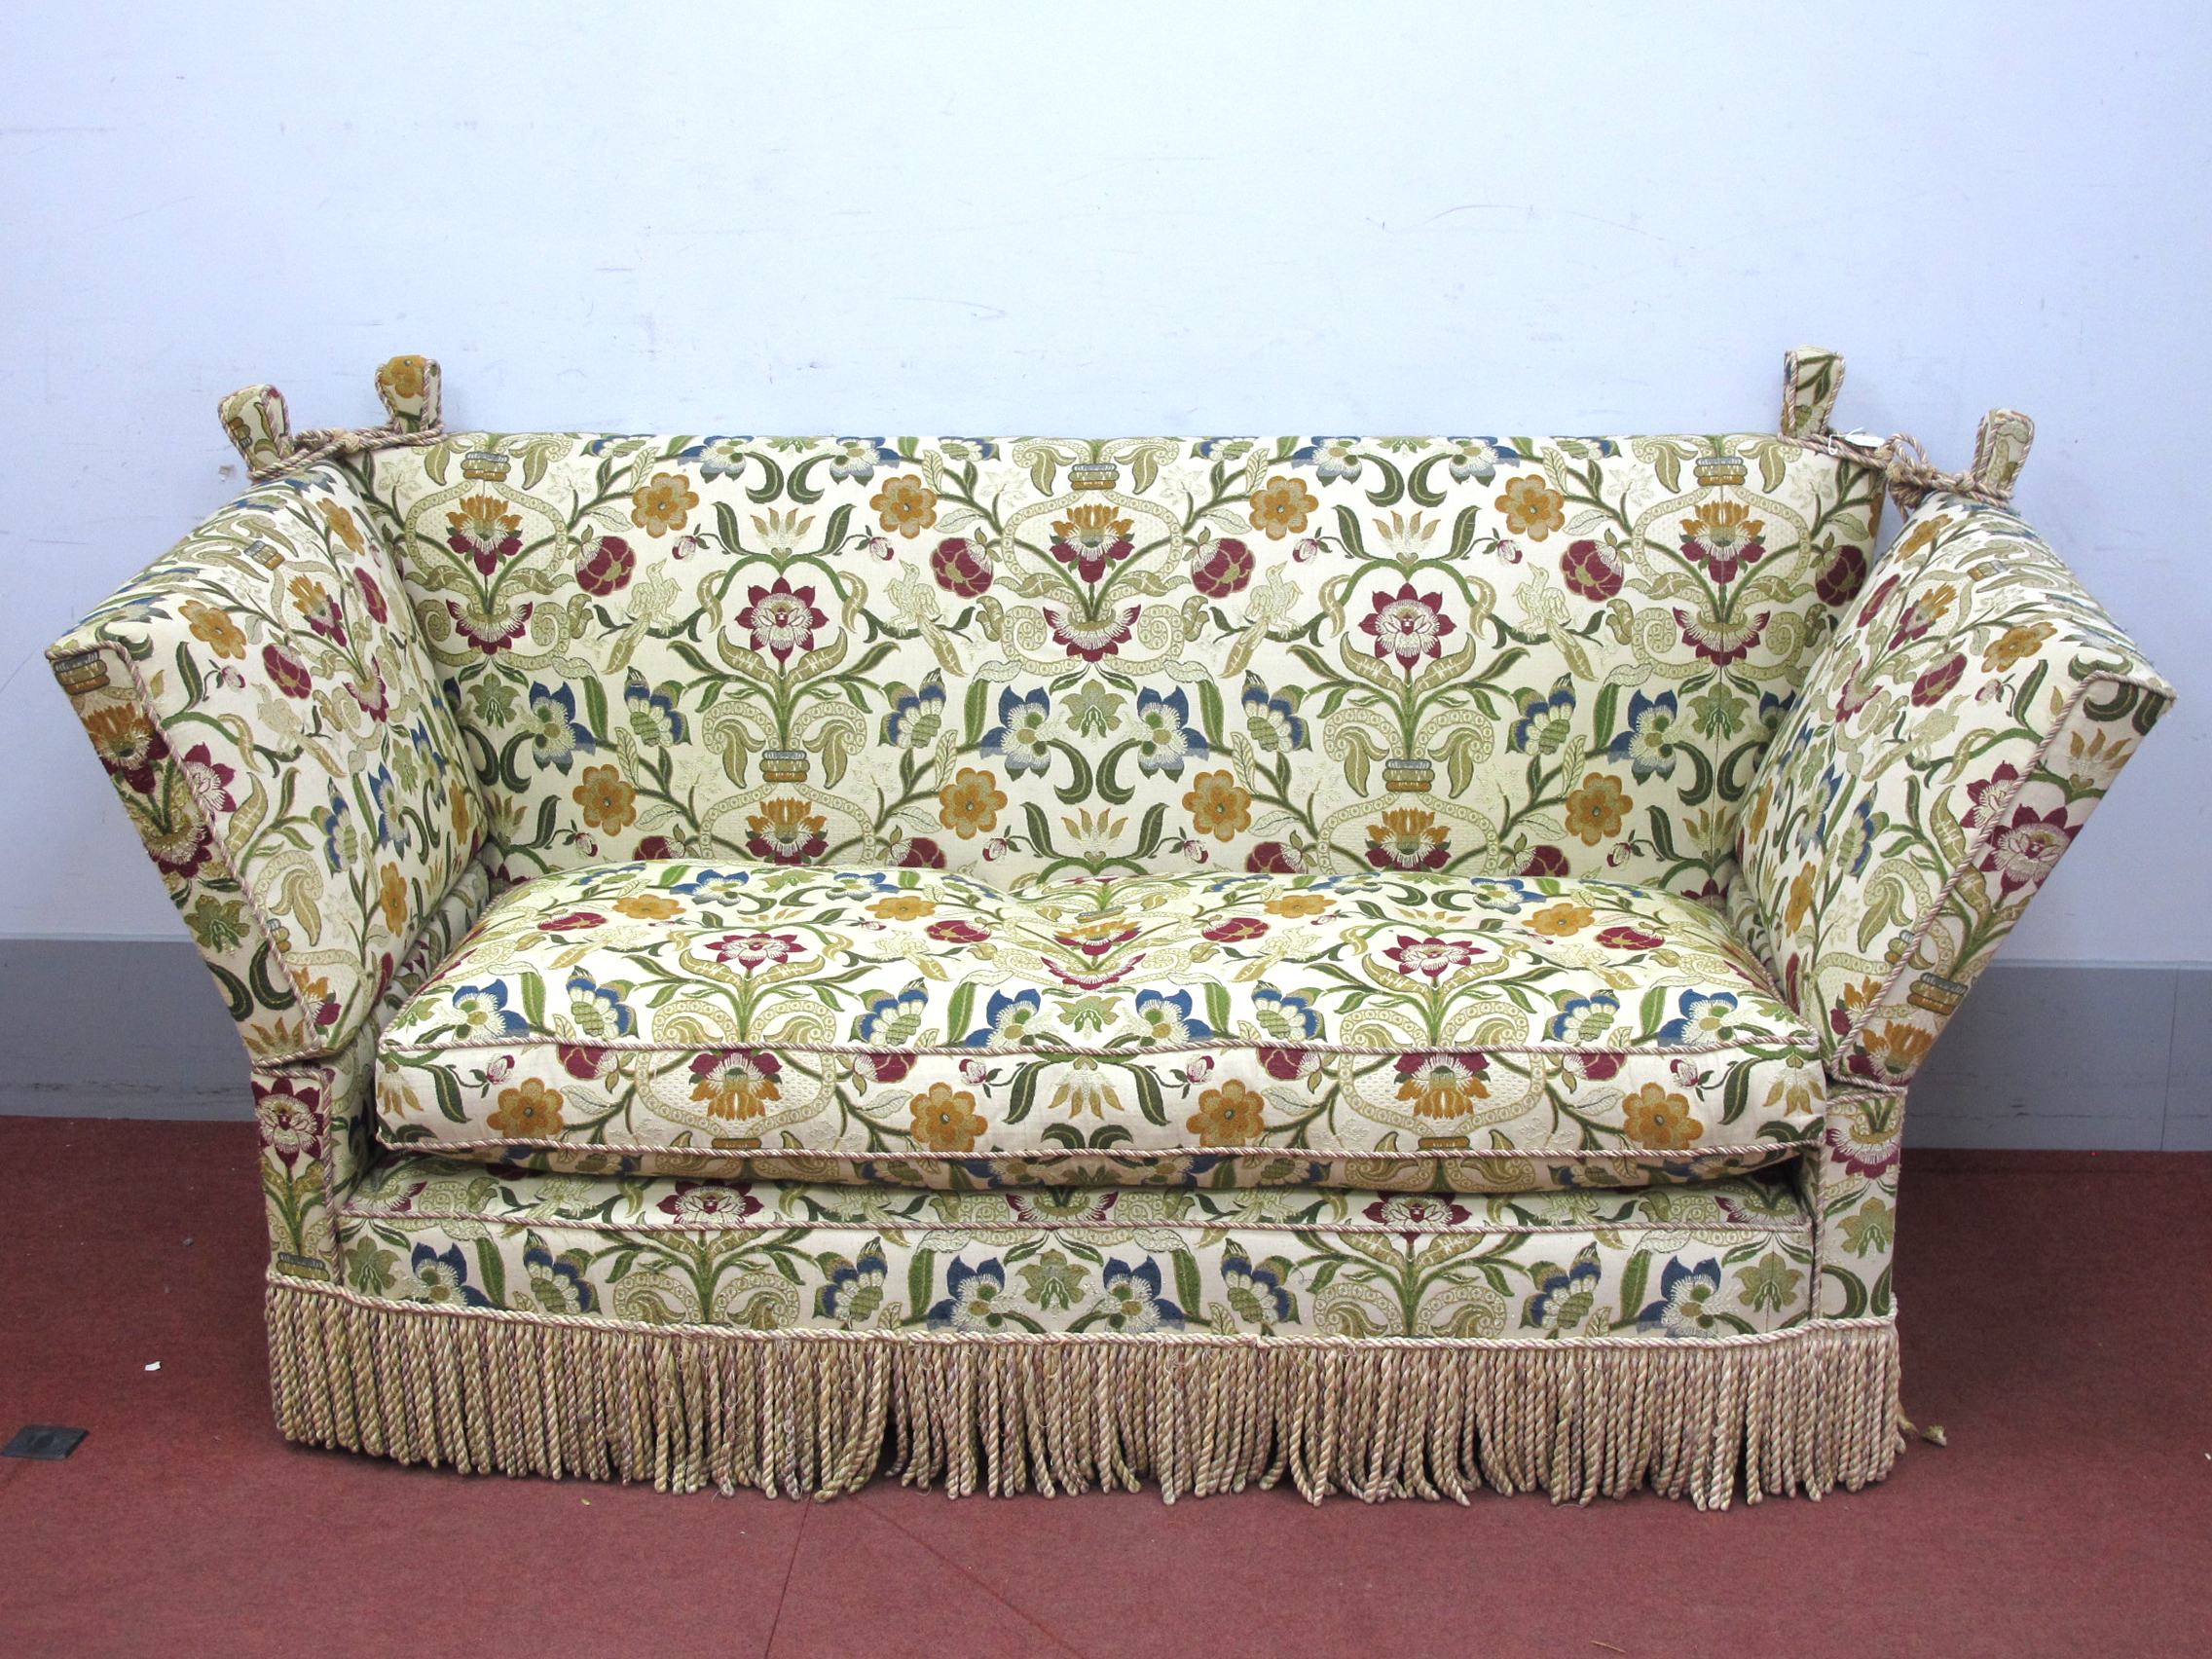 A Knole Settee, upholstered in a floral fabric with tassled fringing and cord ties to the corner